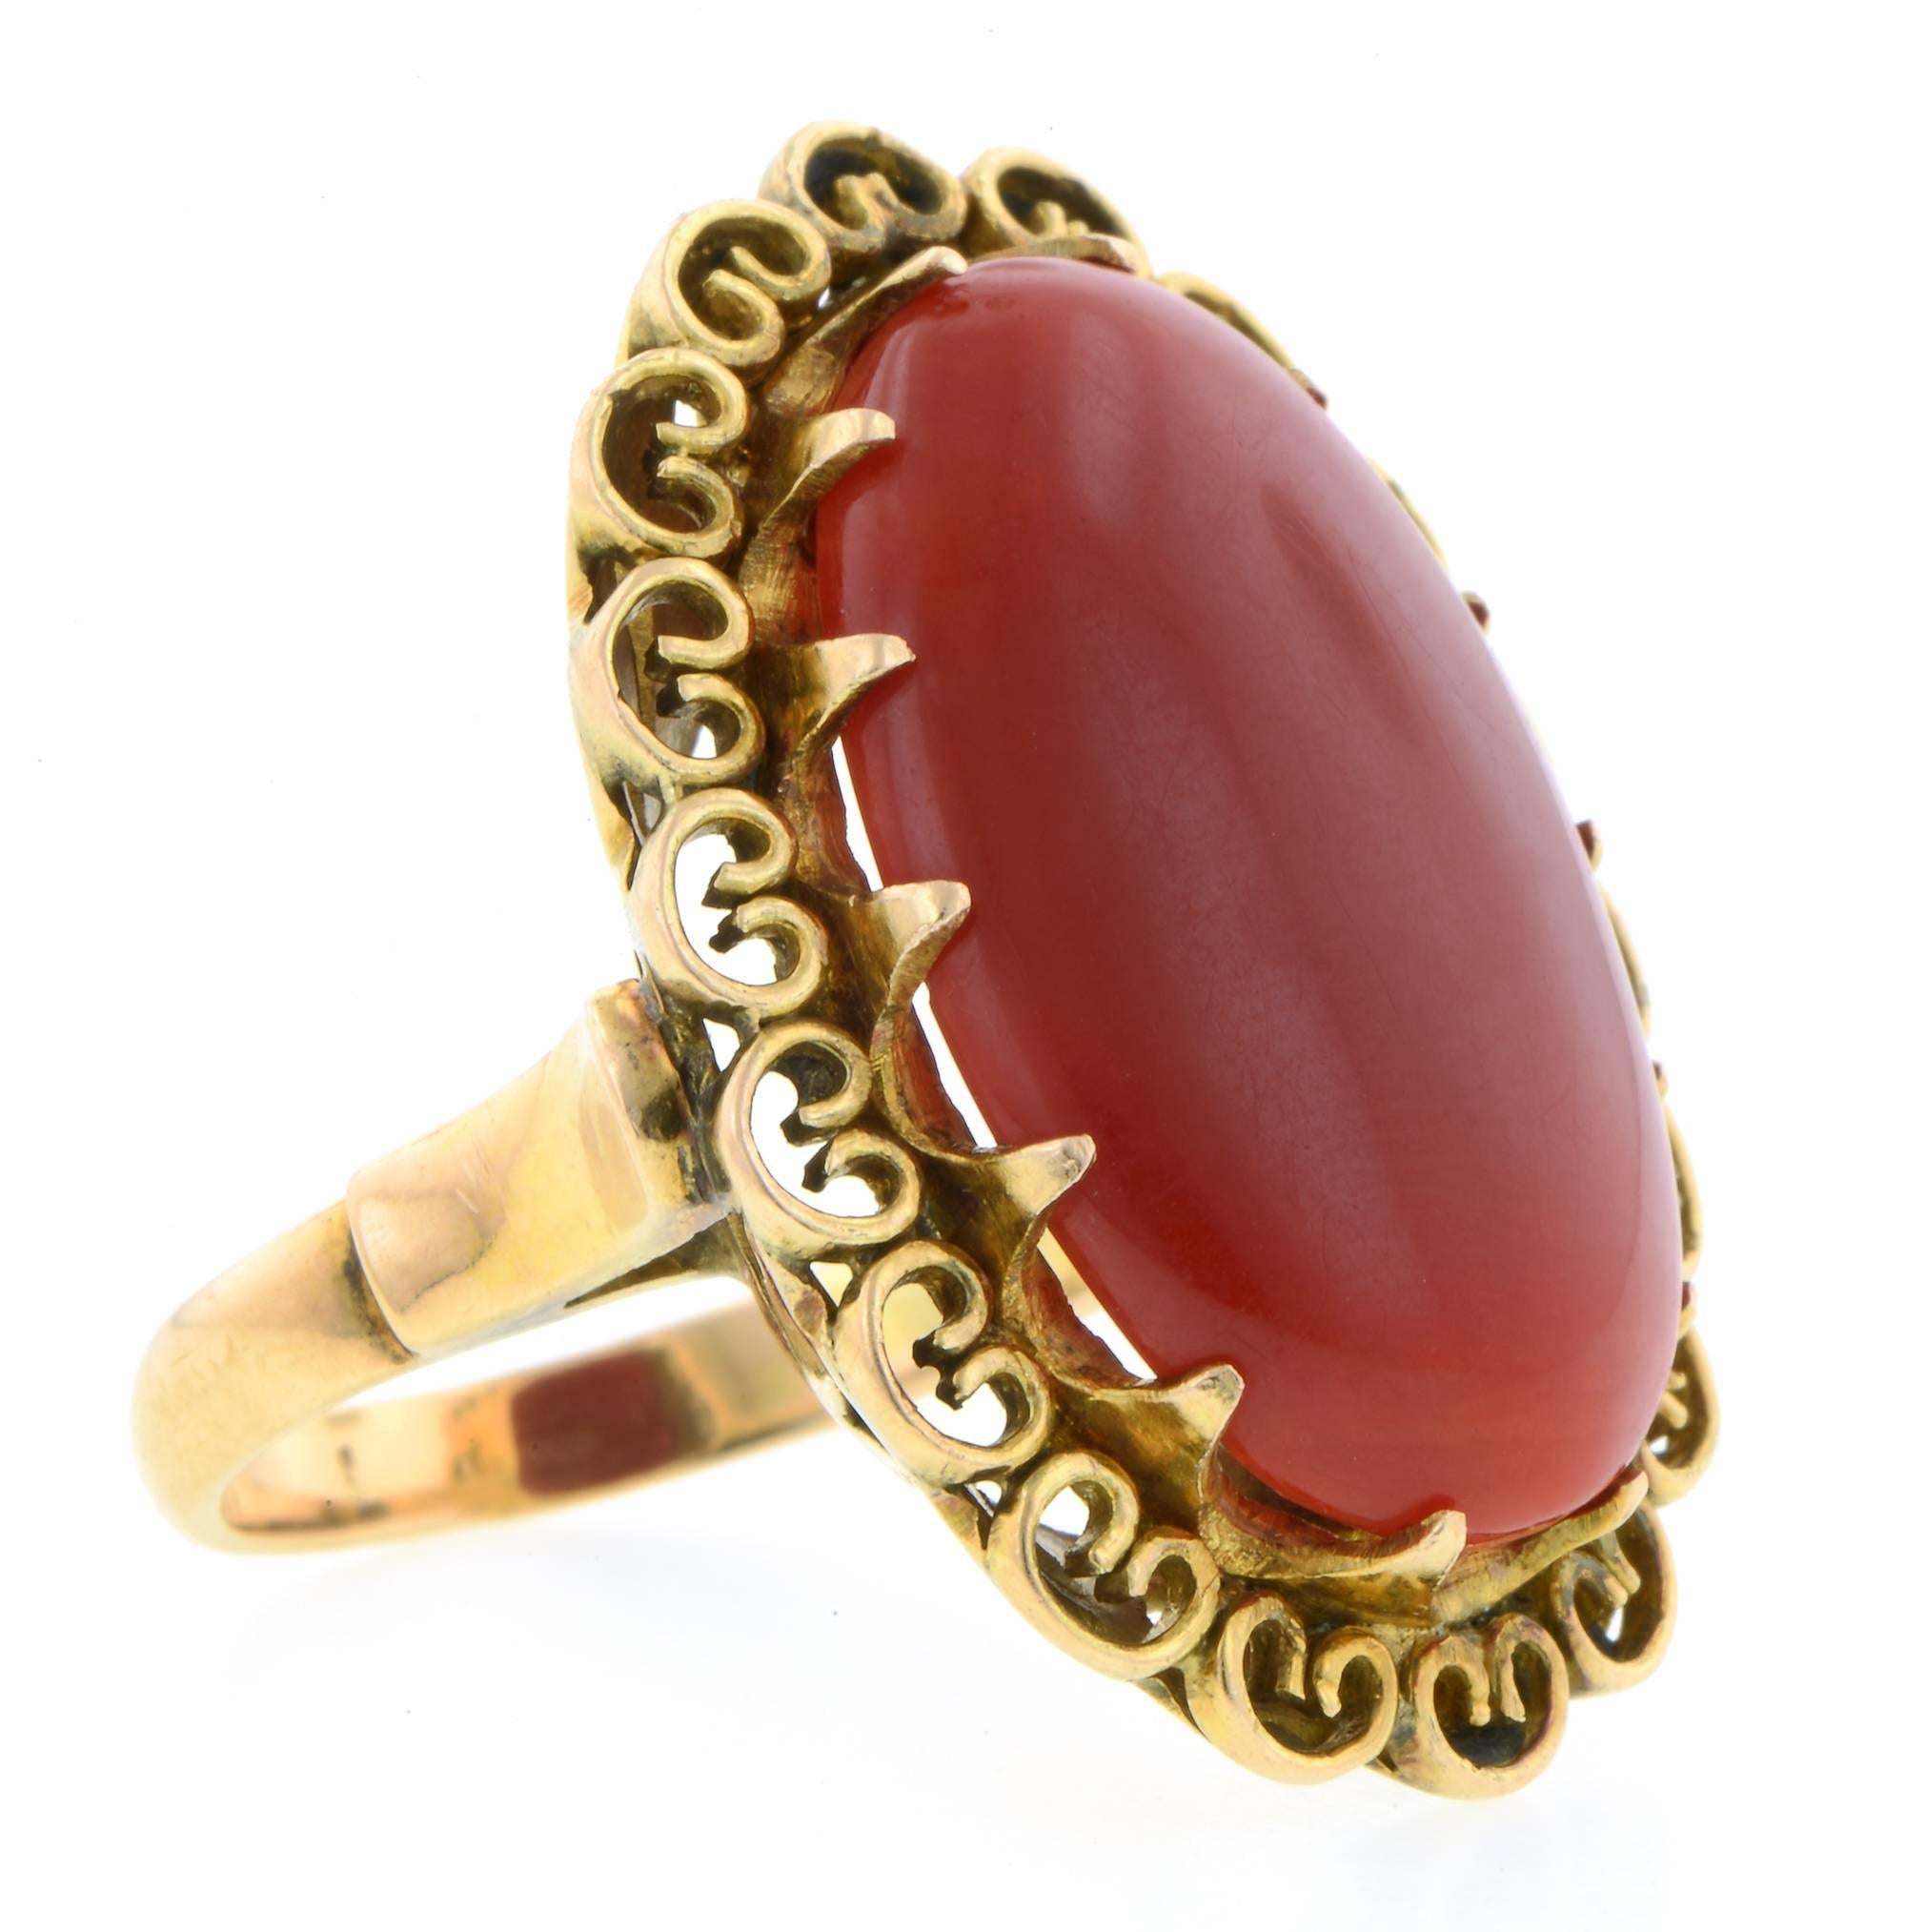 Vintage oval coral cabochon ring centering an oxblood red coral measuring app. 21 x 14.3mm., in a scroll work frame, fashioned in 14k.  Size 5.